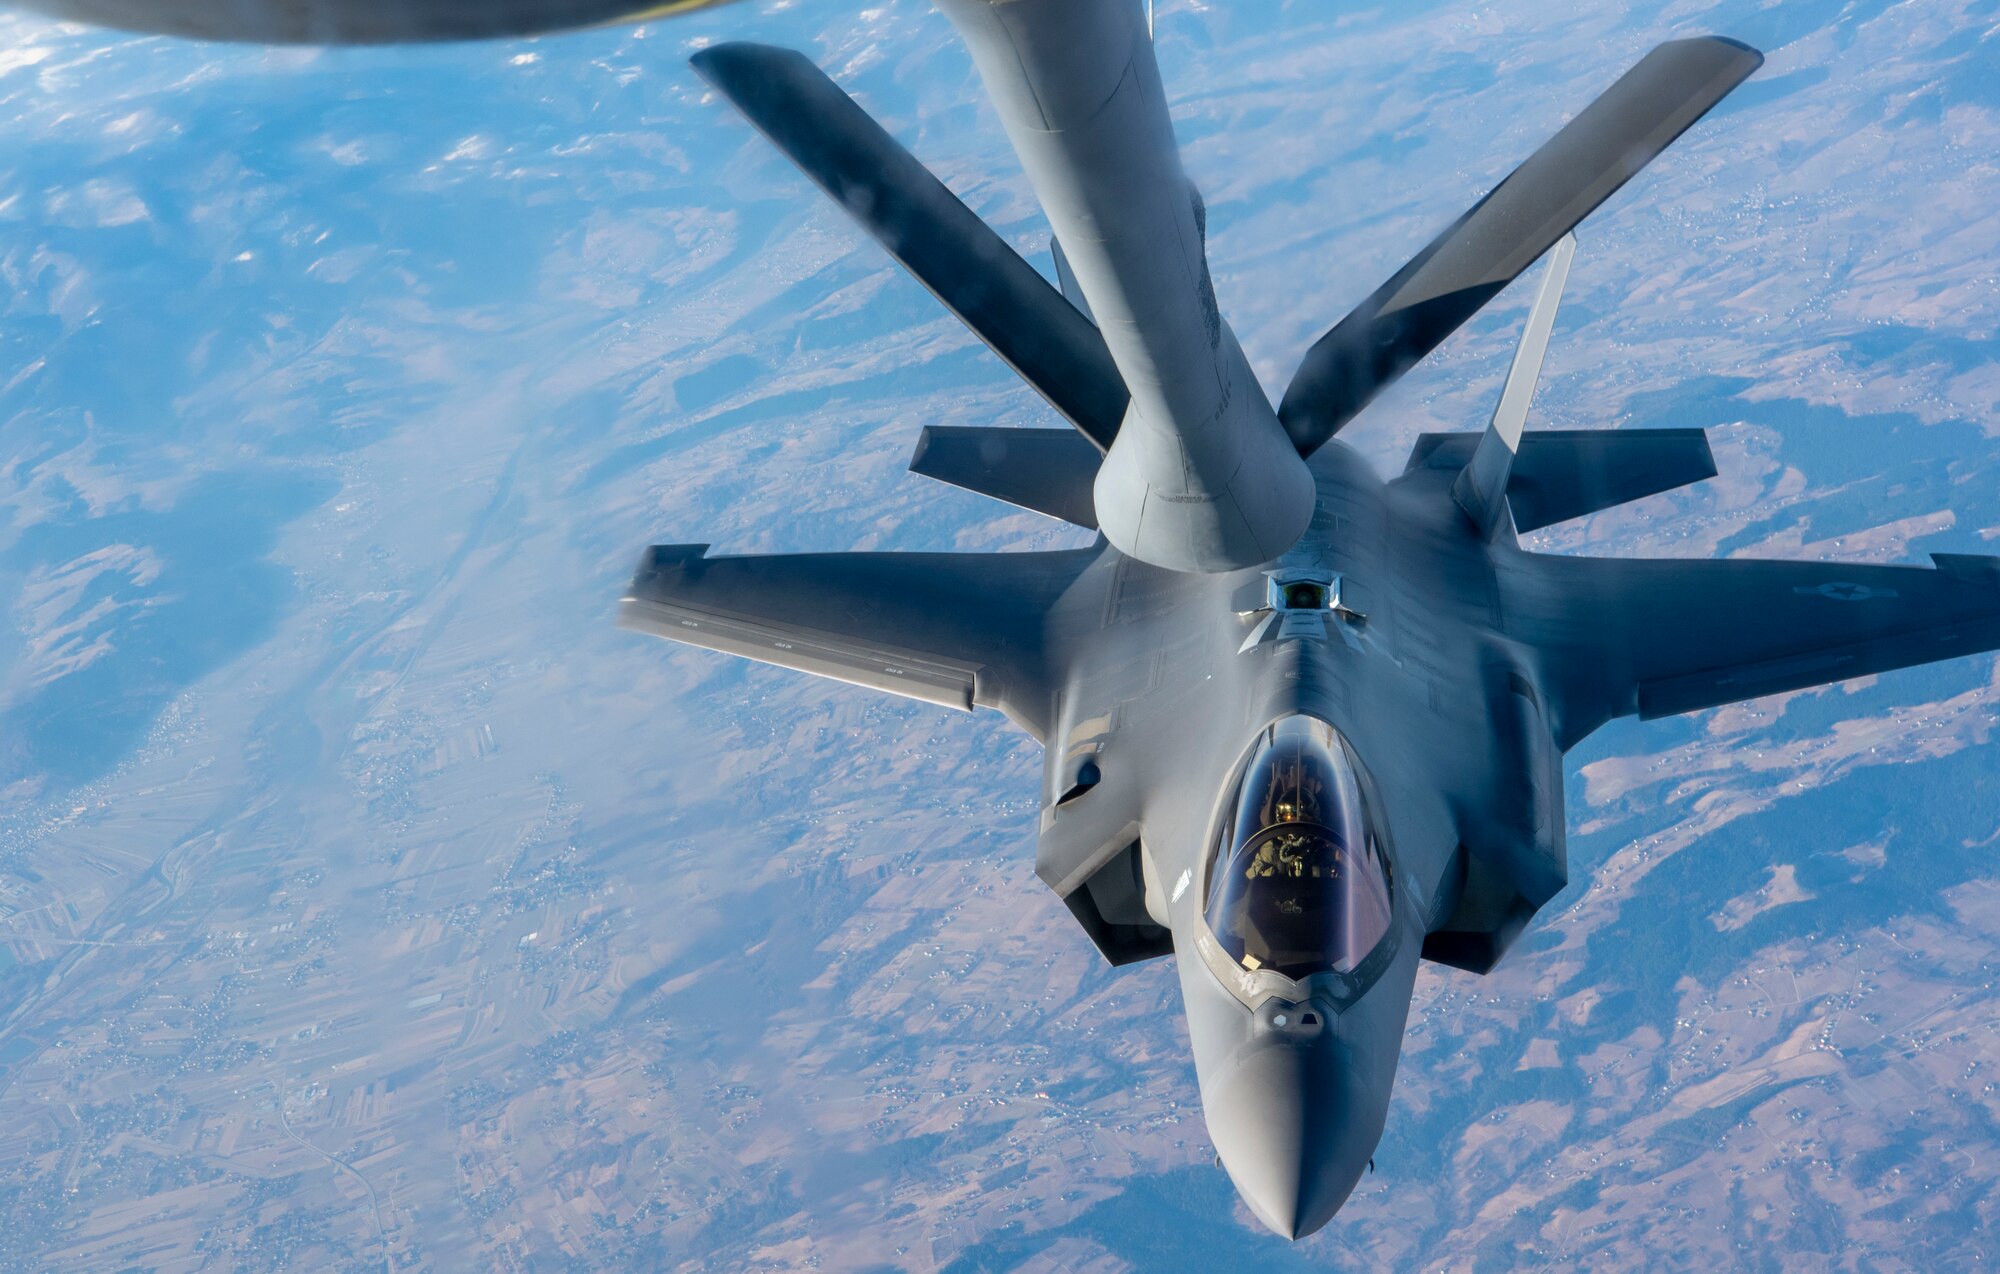 An F-35A Lightning II assigned to Hill Air Force Base, Utah approaches a boom to receive fuel from a KC-135 Stratotanker assigned to Fairchild Air Force Base, Washington, March 22, 2022. Airmen and F-35s from Hill AFB were tasked to bolster deterrence and defense capabilities of the NATO alliance. (U.S. Air Force photo by Airman 1st Class Jessica Sanchez-Chen)